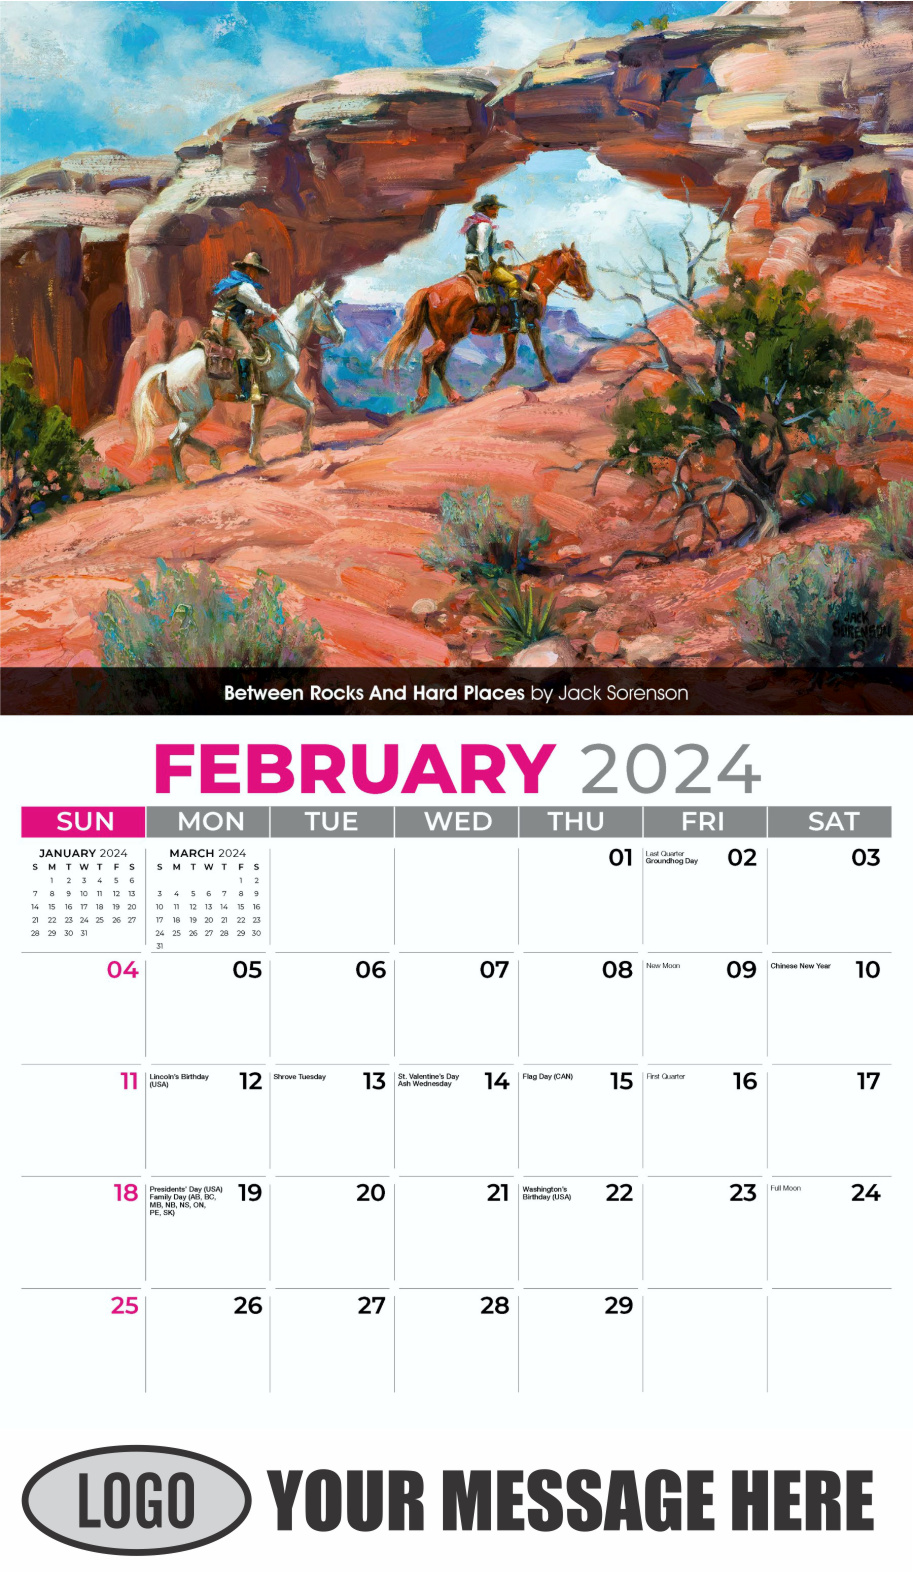 Spirit of the Old West 2024 Old West Art Business Promo Wall Calendar - February